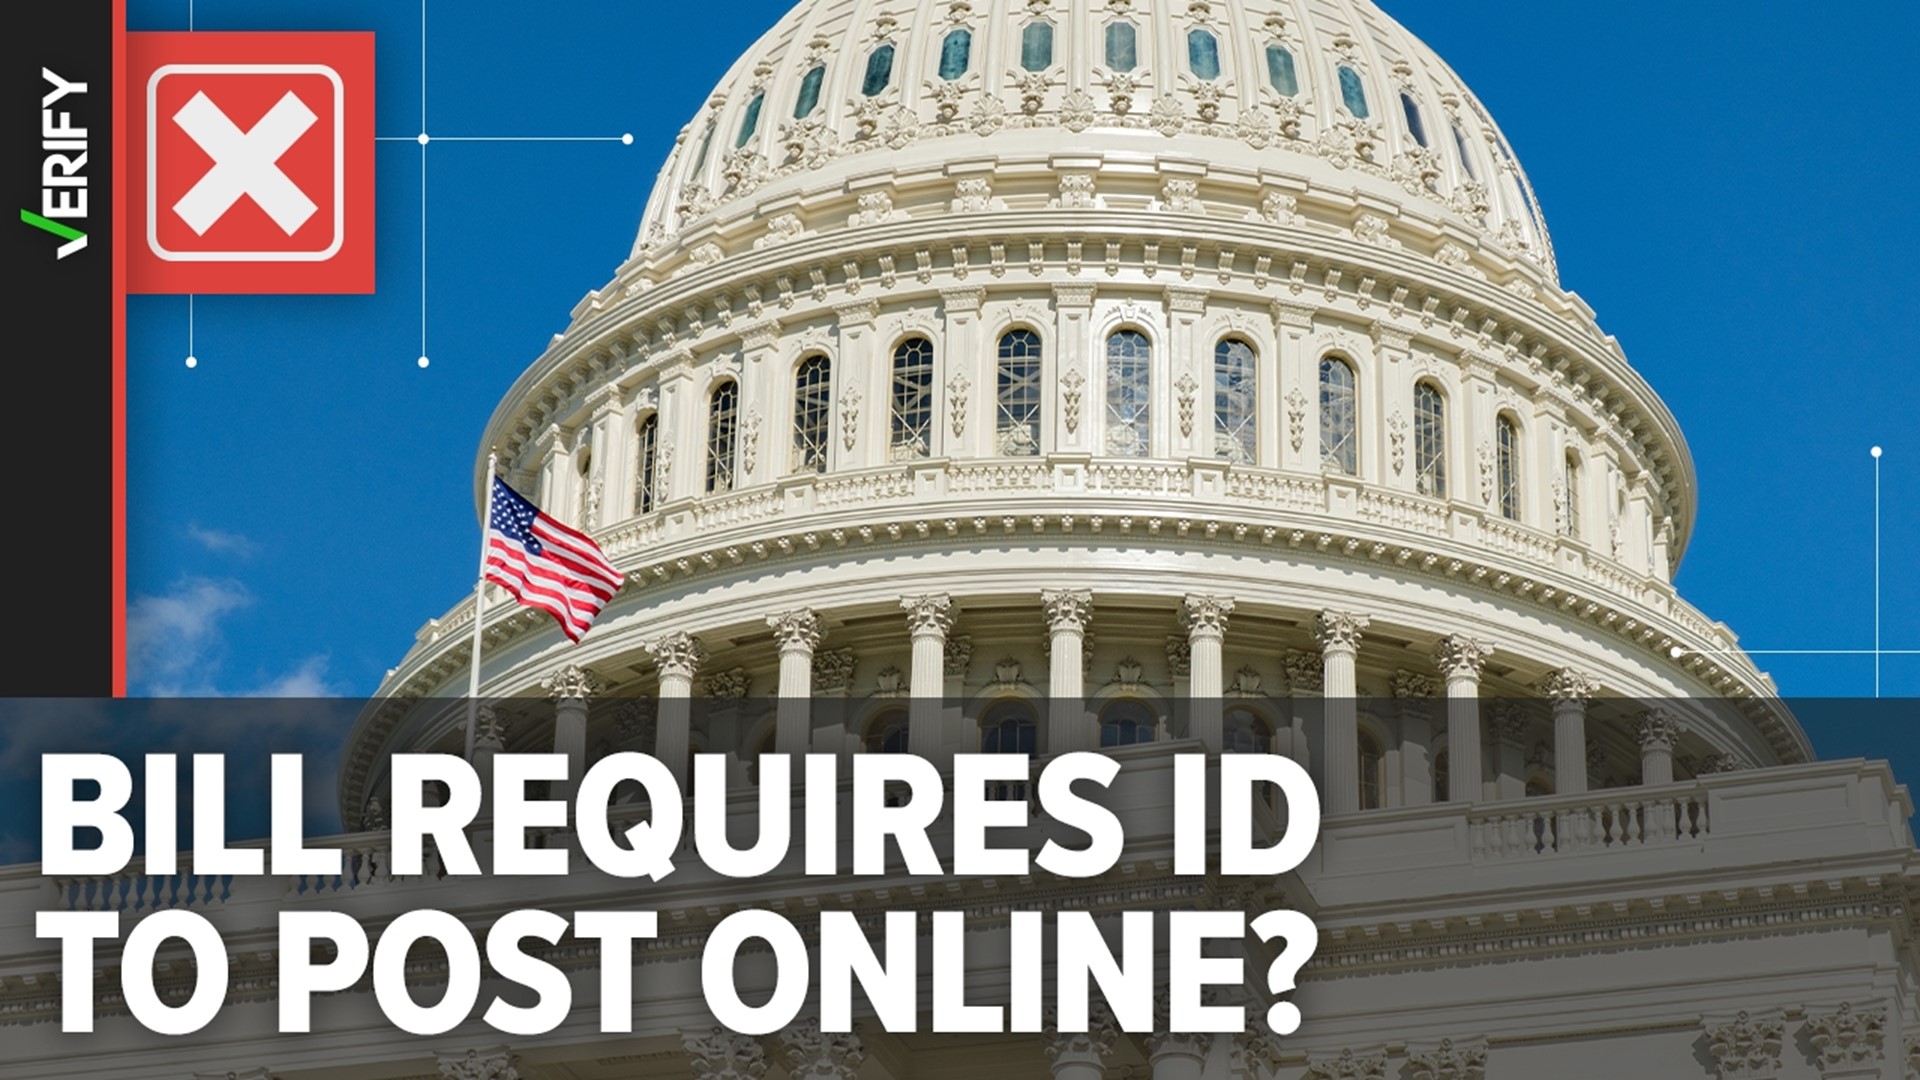 Social media posts falsely claim the Kids Online Safety Act, or KOSA, would require people to upload their driver’s licenses to use post online.